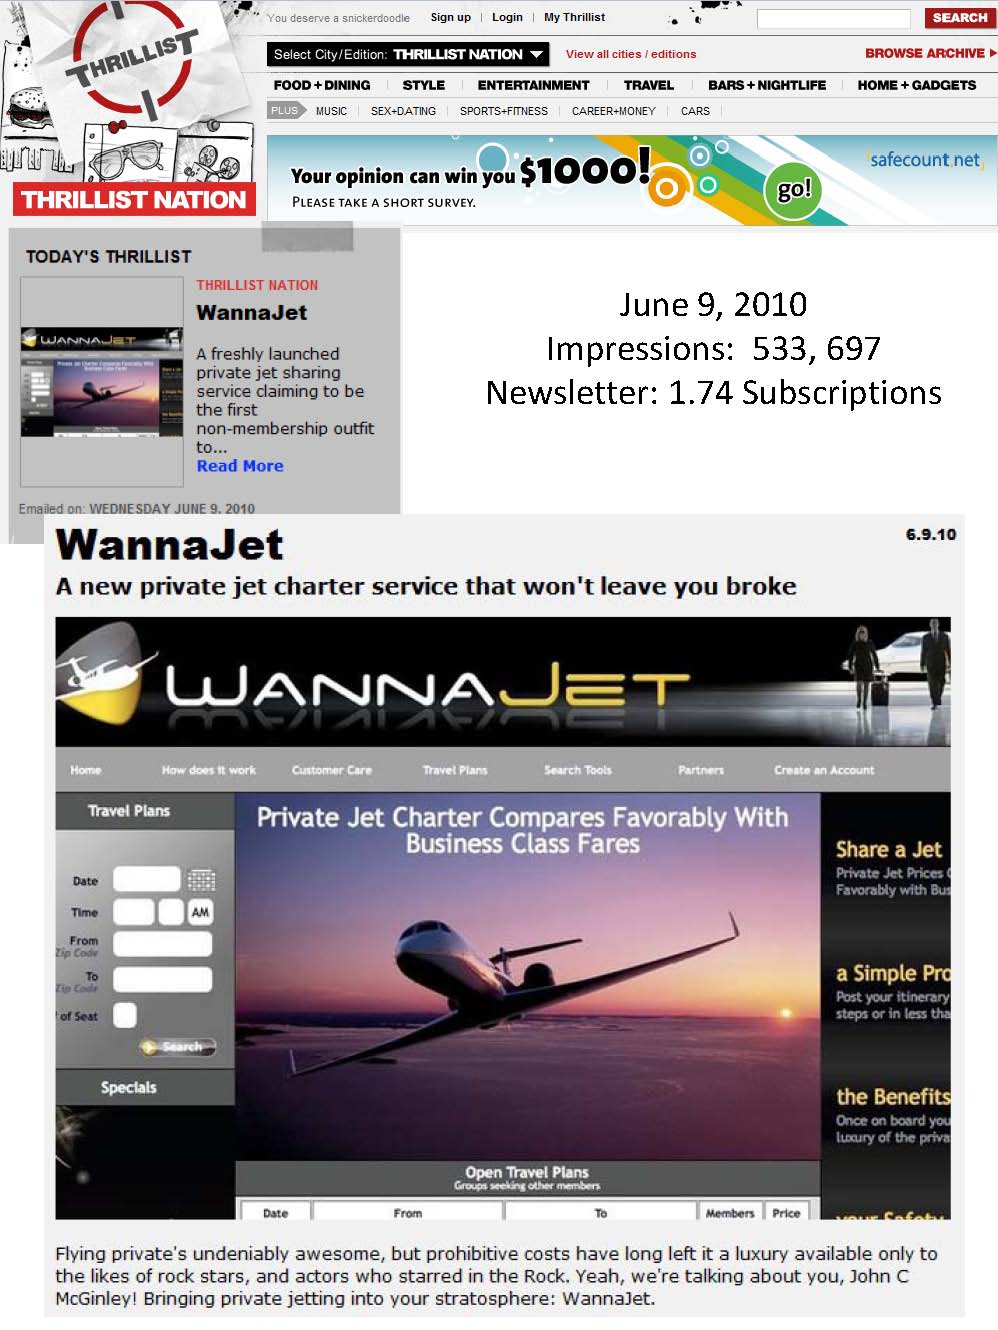 WannaJet Launches TODAY in New York: First Media Debut on Thrillist! (Travel PR)